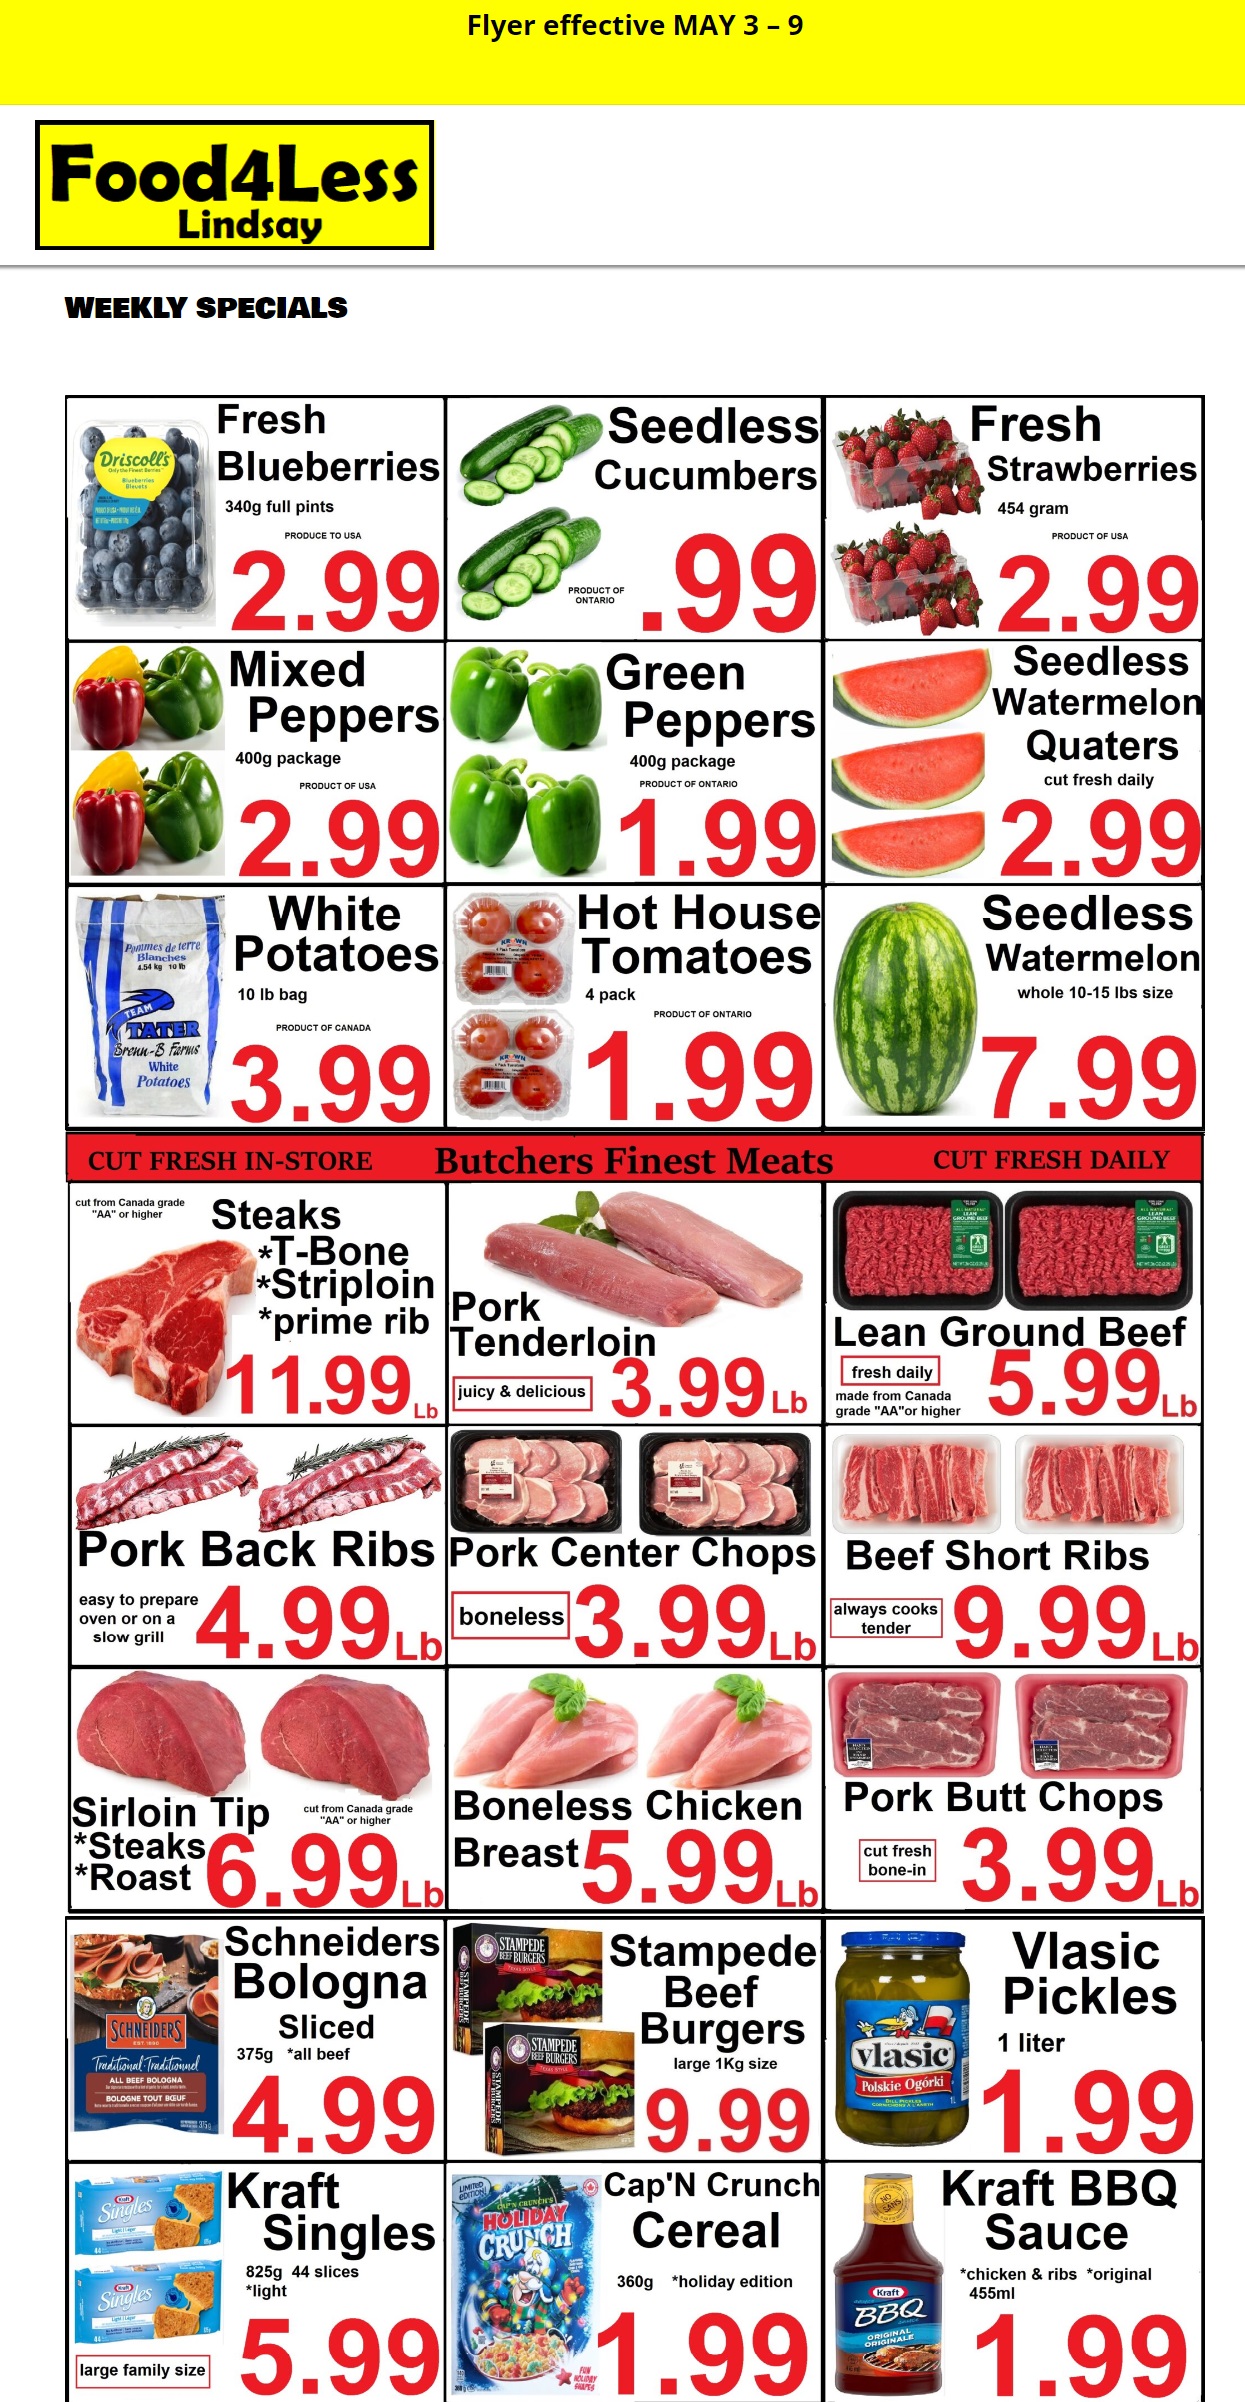 Food4Less - Lindsay - Weekly Flyer Specials